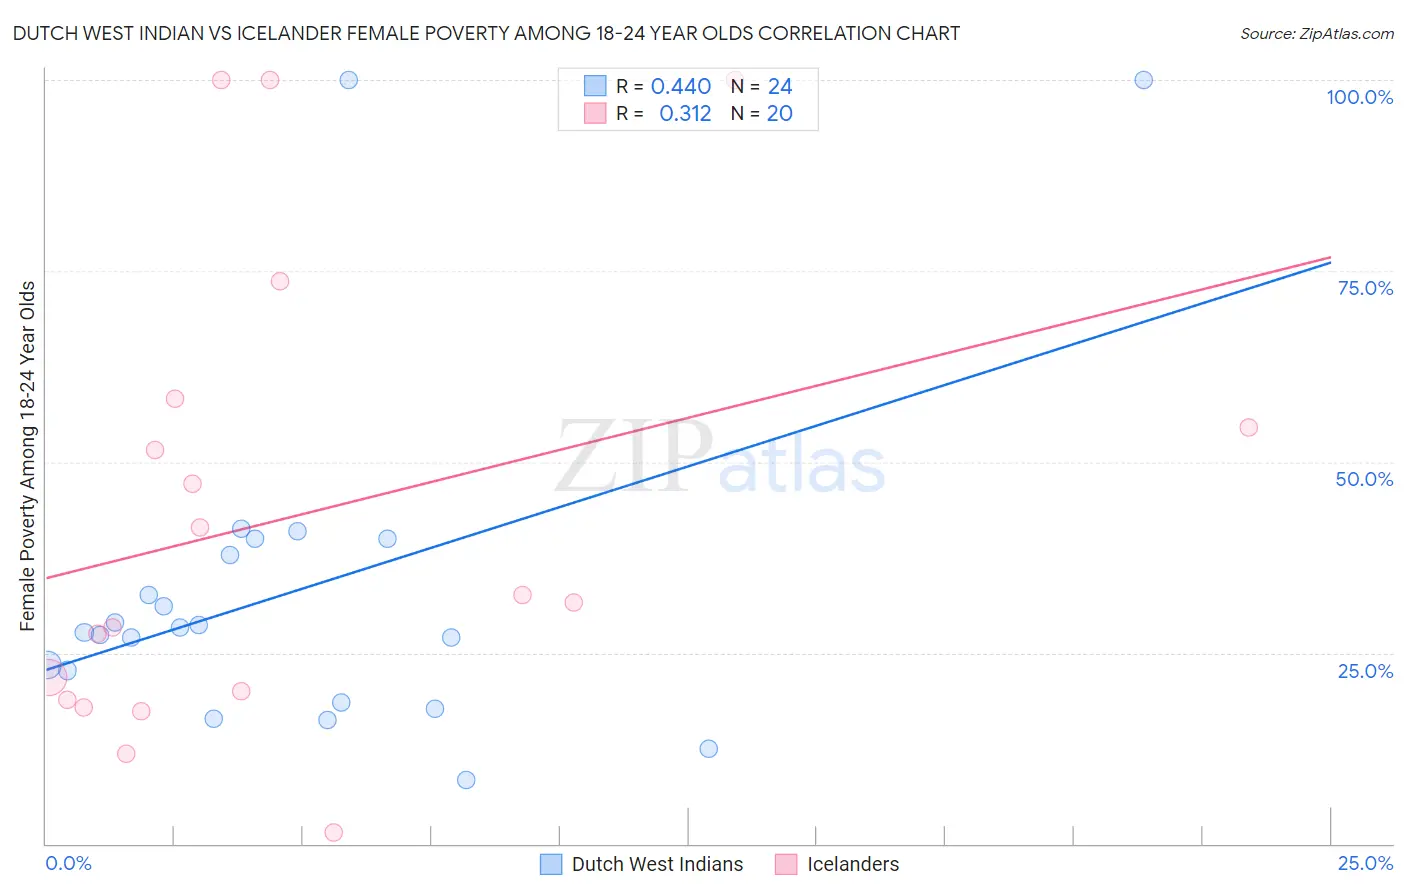 Dutch West Indian vs Icelander Female Poverty Among 18-24 Year Olds